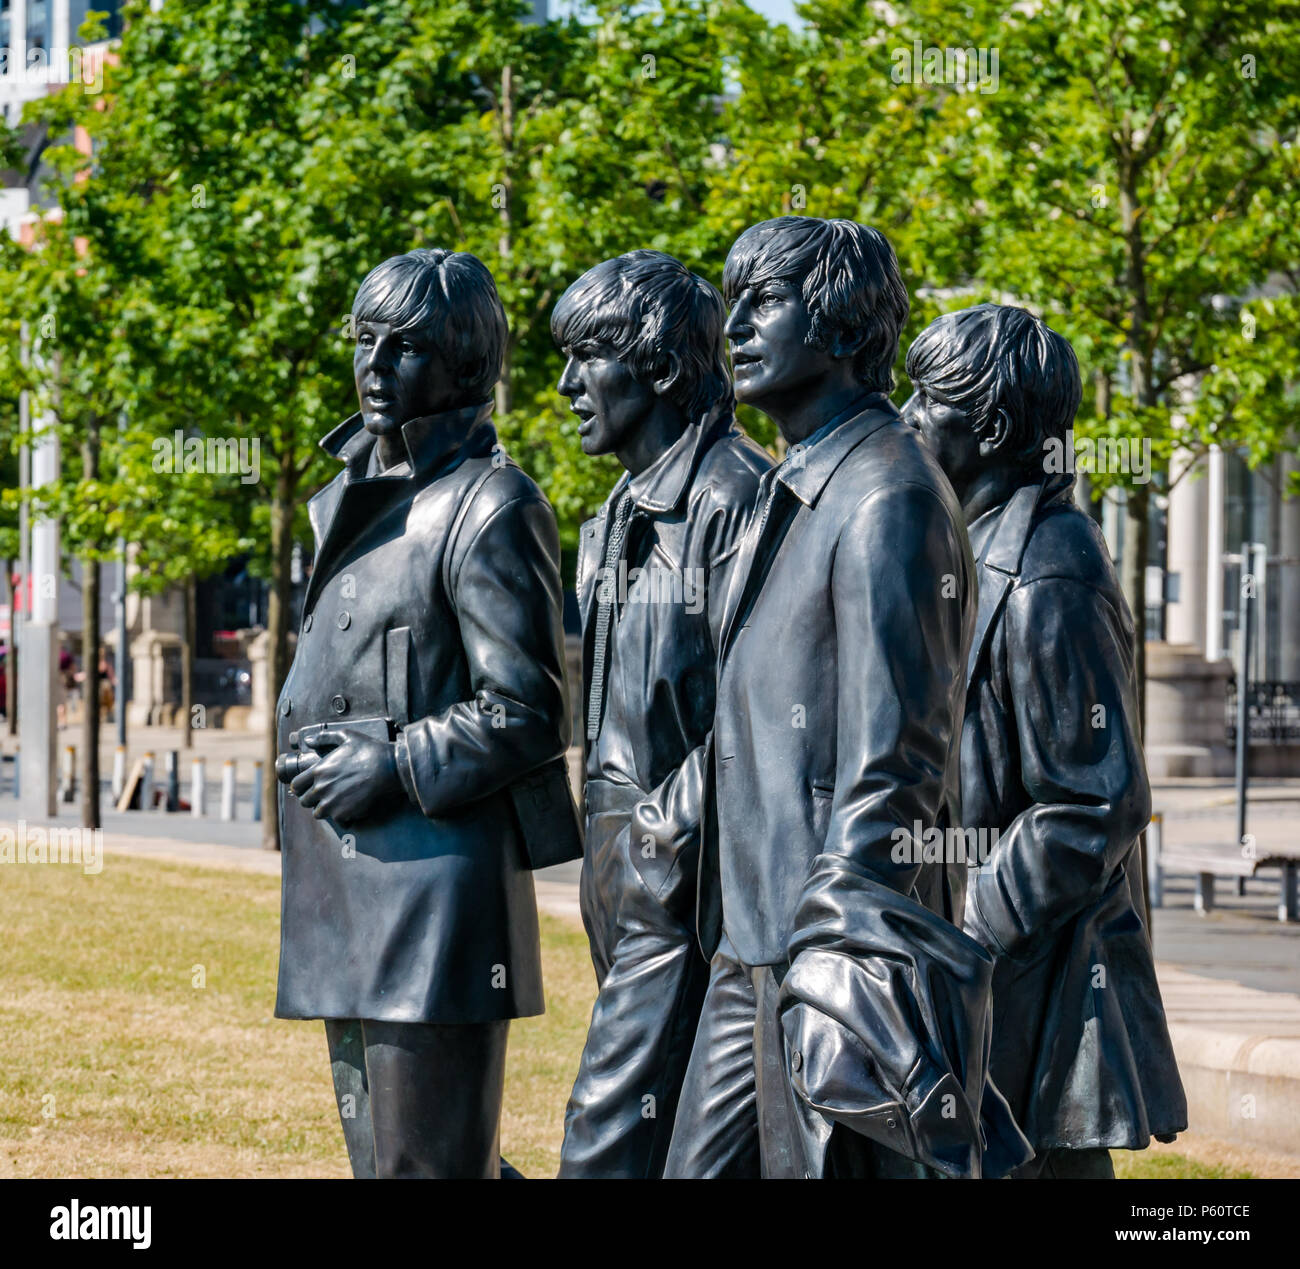 Beatles pop band statue, donated by Cavern Club, designed by sculptor Andrew Edwards, Pier Head, Liverpool, England, UK Stock Photo